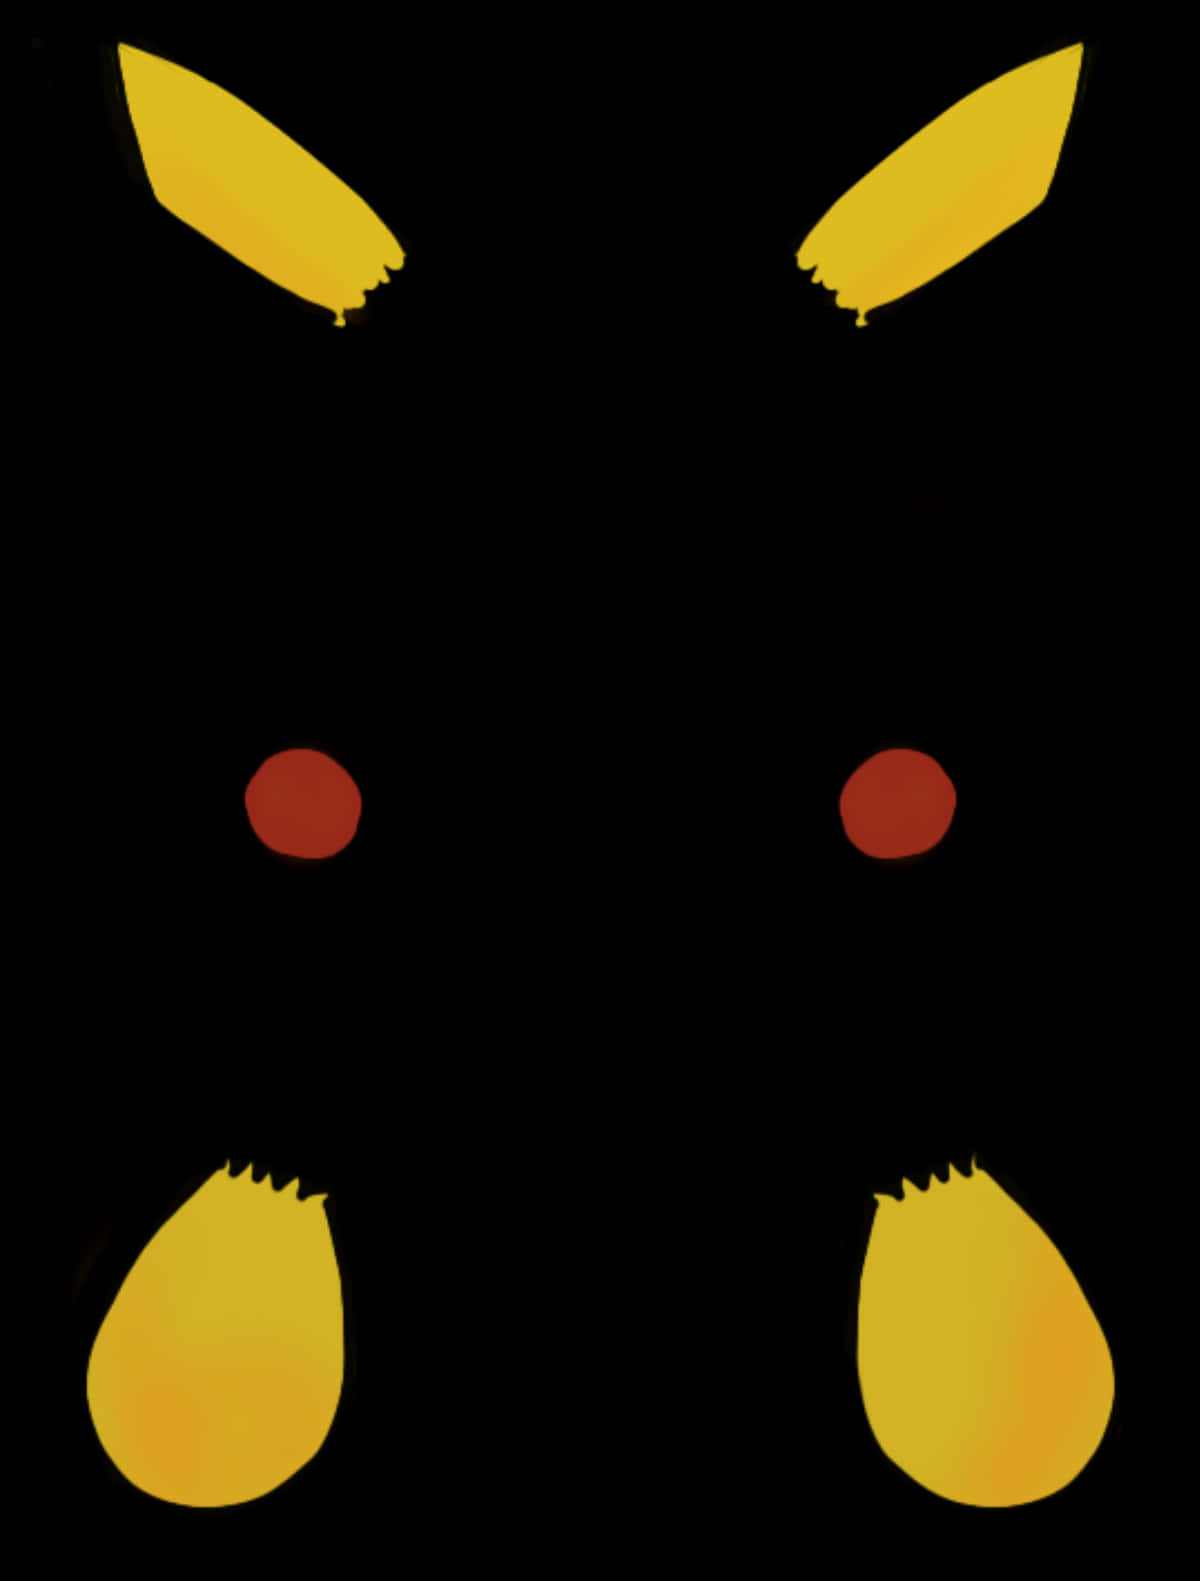 A Group Of Yellow Lights On A Black Background